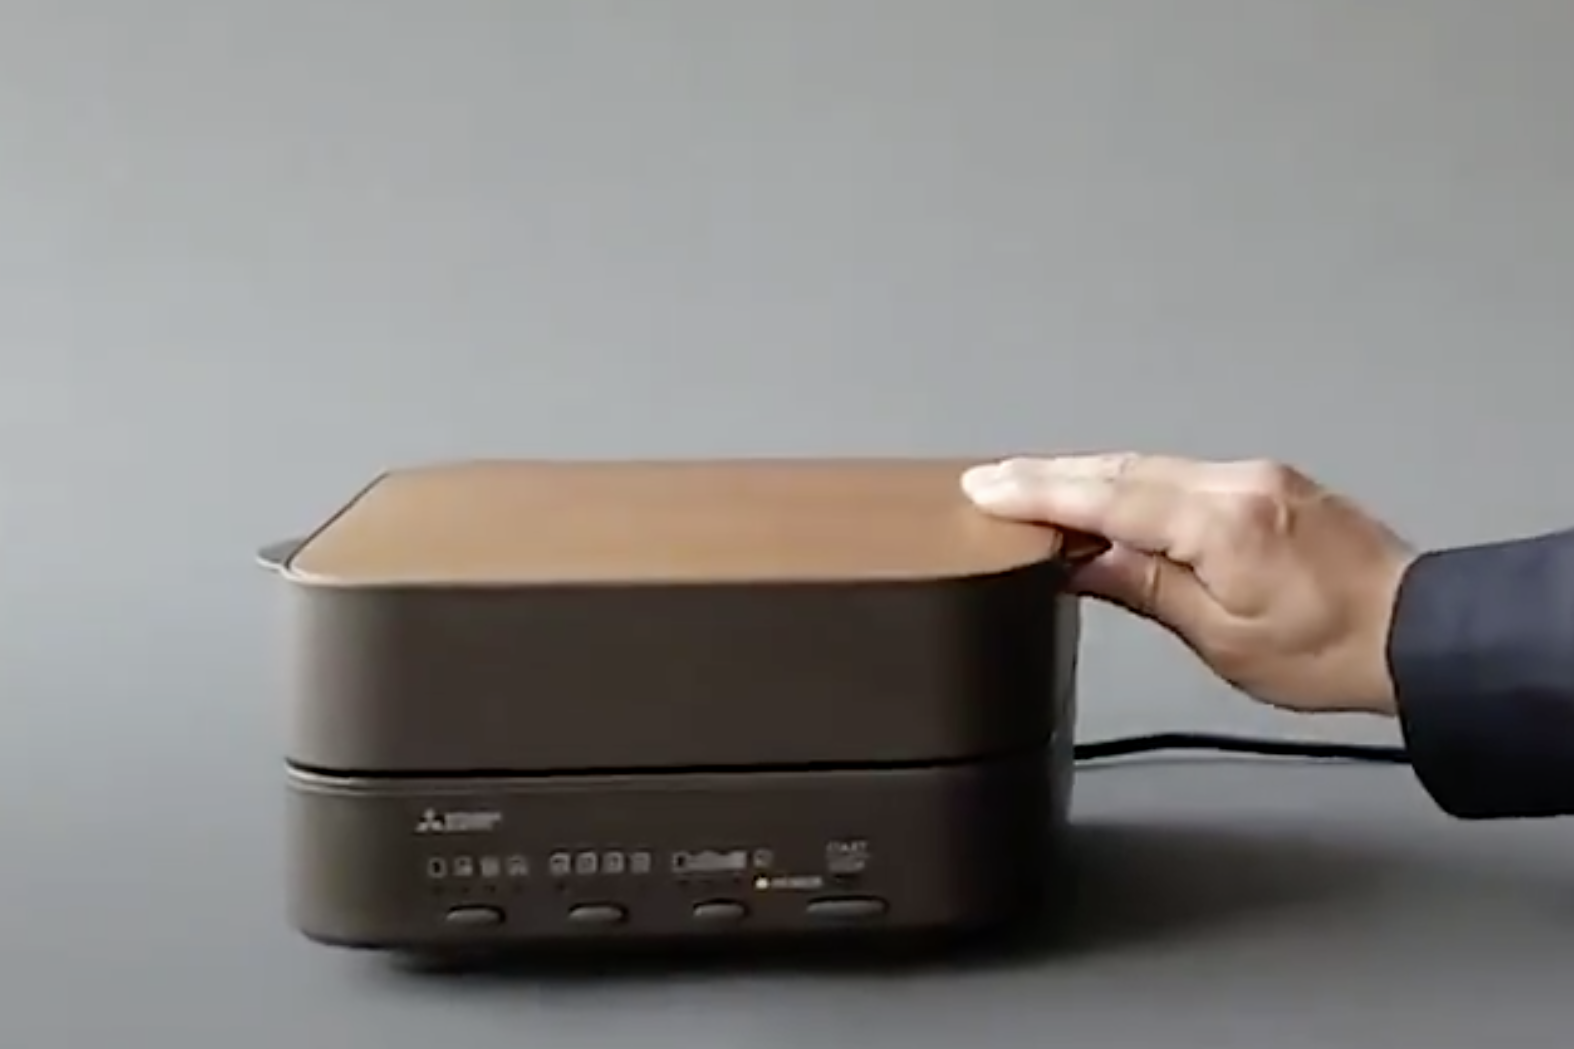 Japanese toaster designed by Mitsubishi costs £215 and makes just